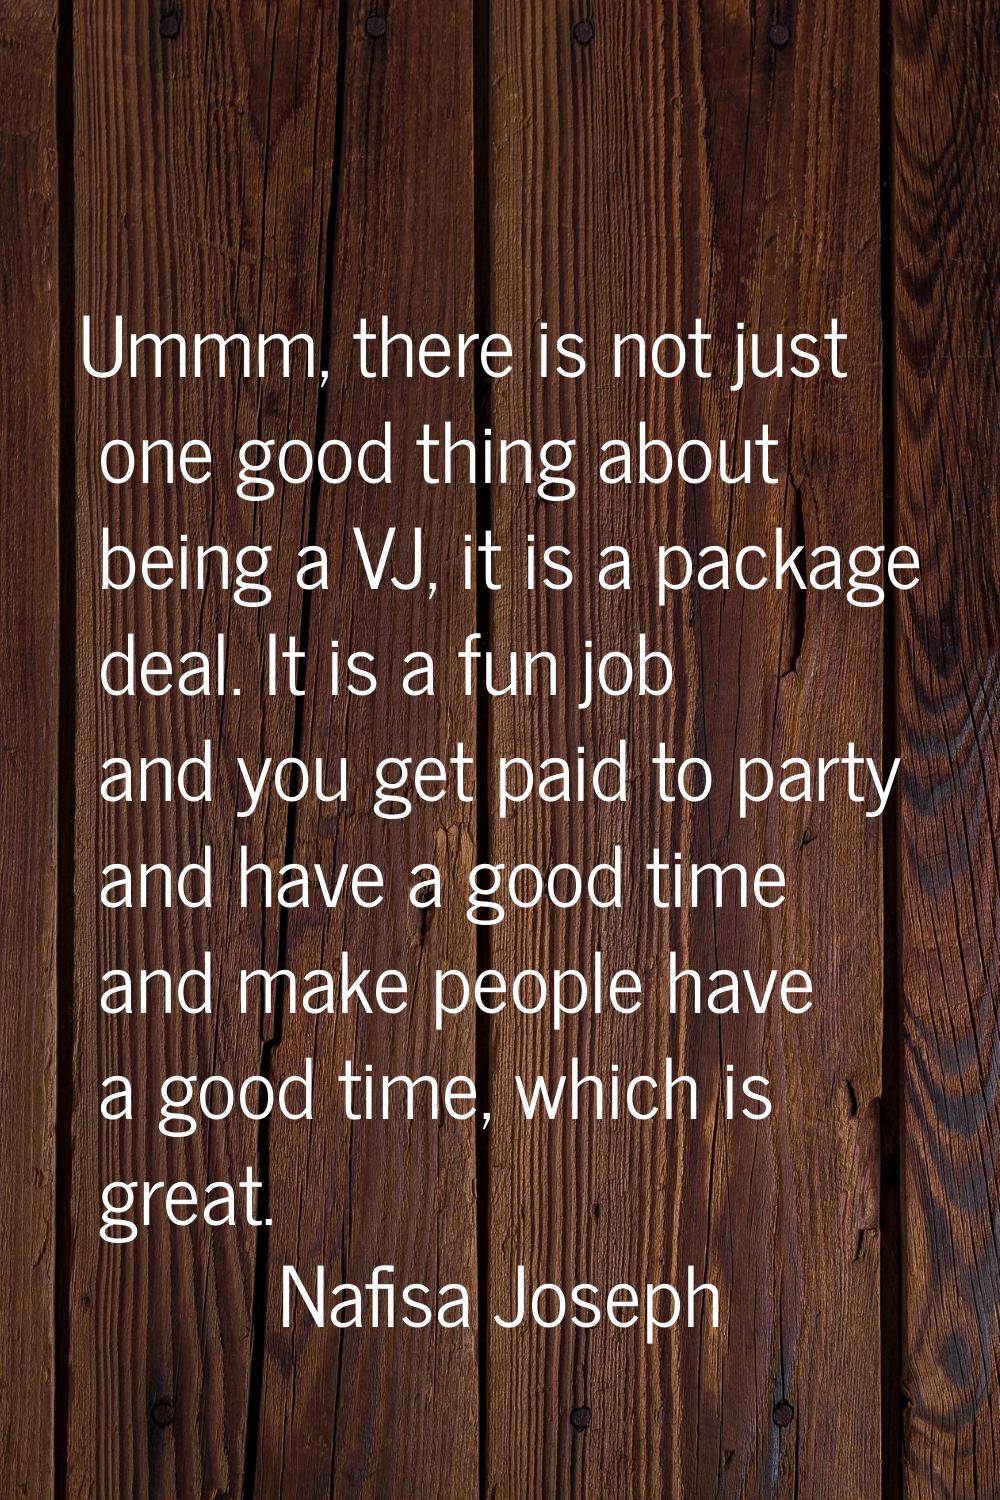 Ummm, there is not just one good thing about being a VJ, it is a package deal. It is a fun job and 